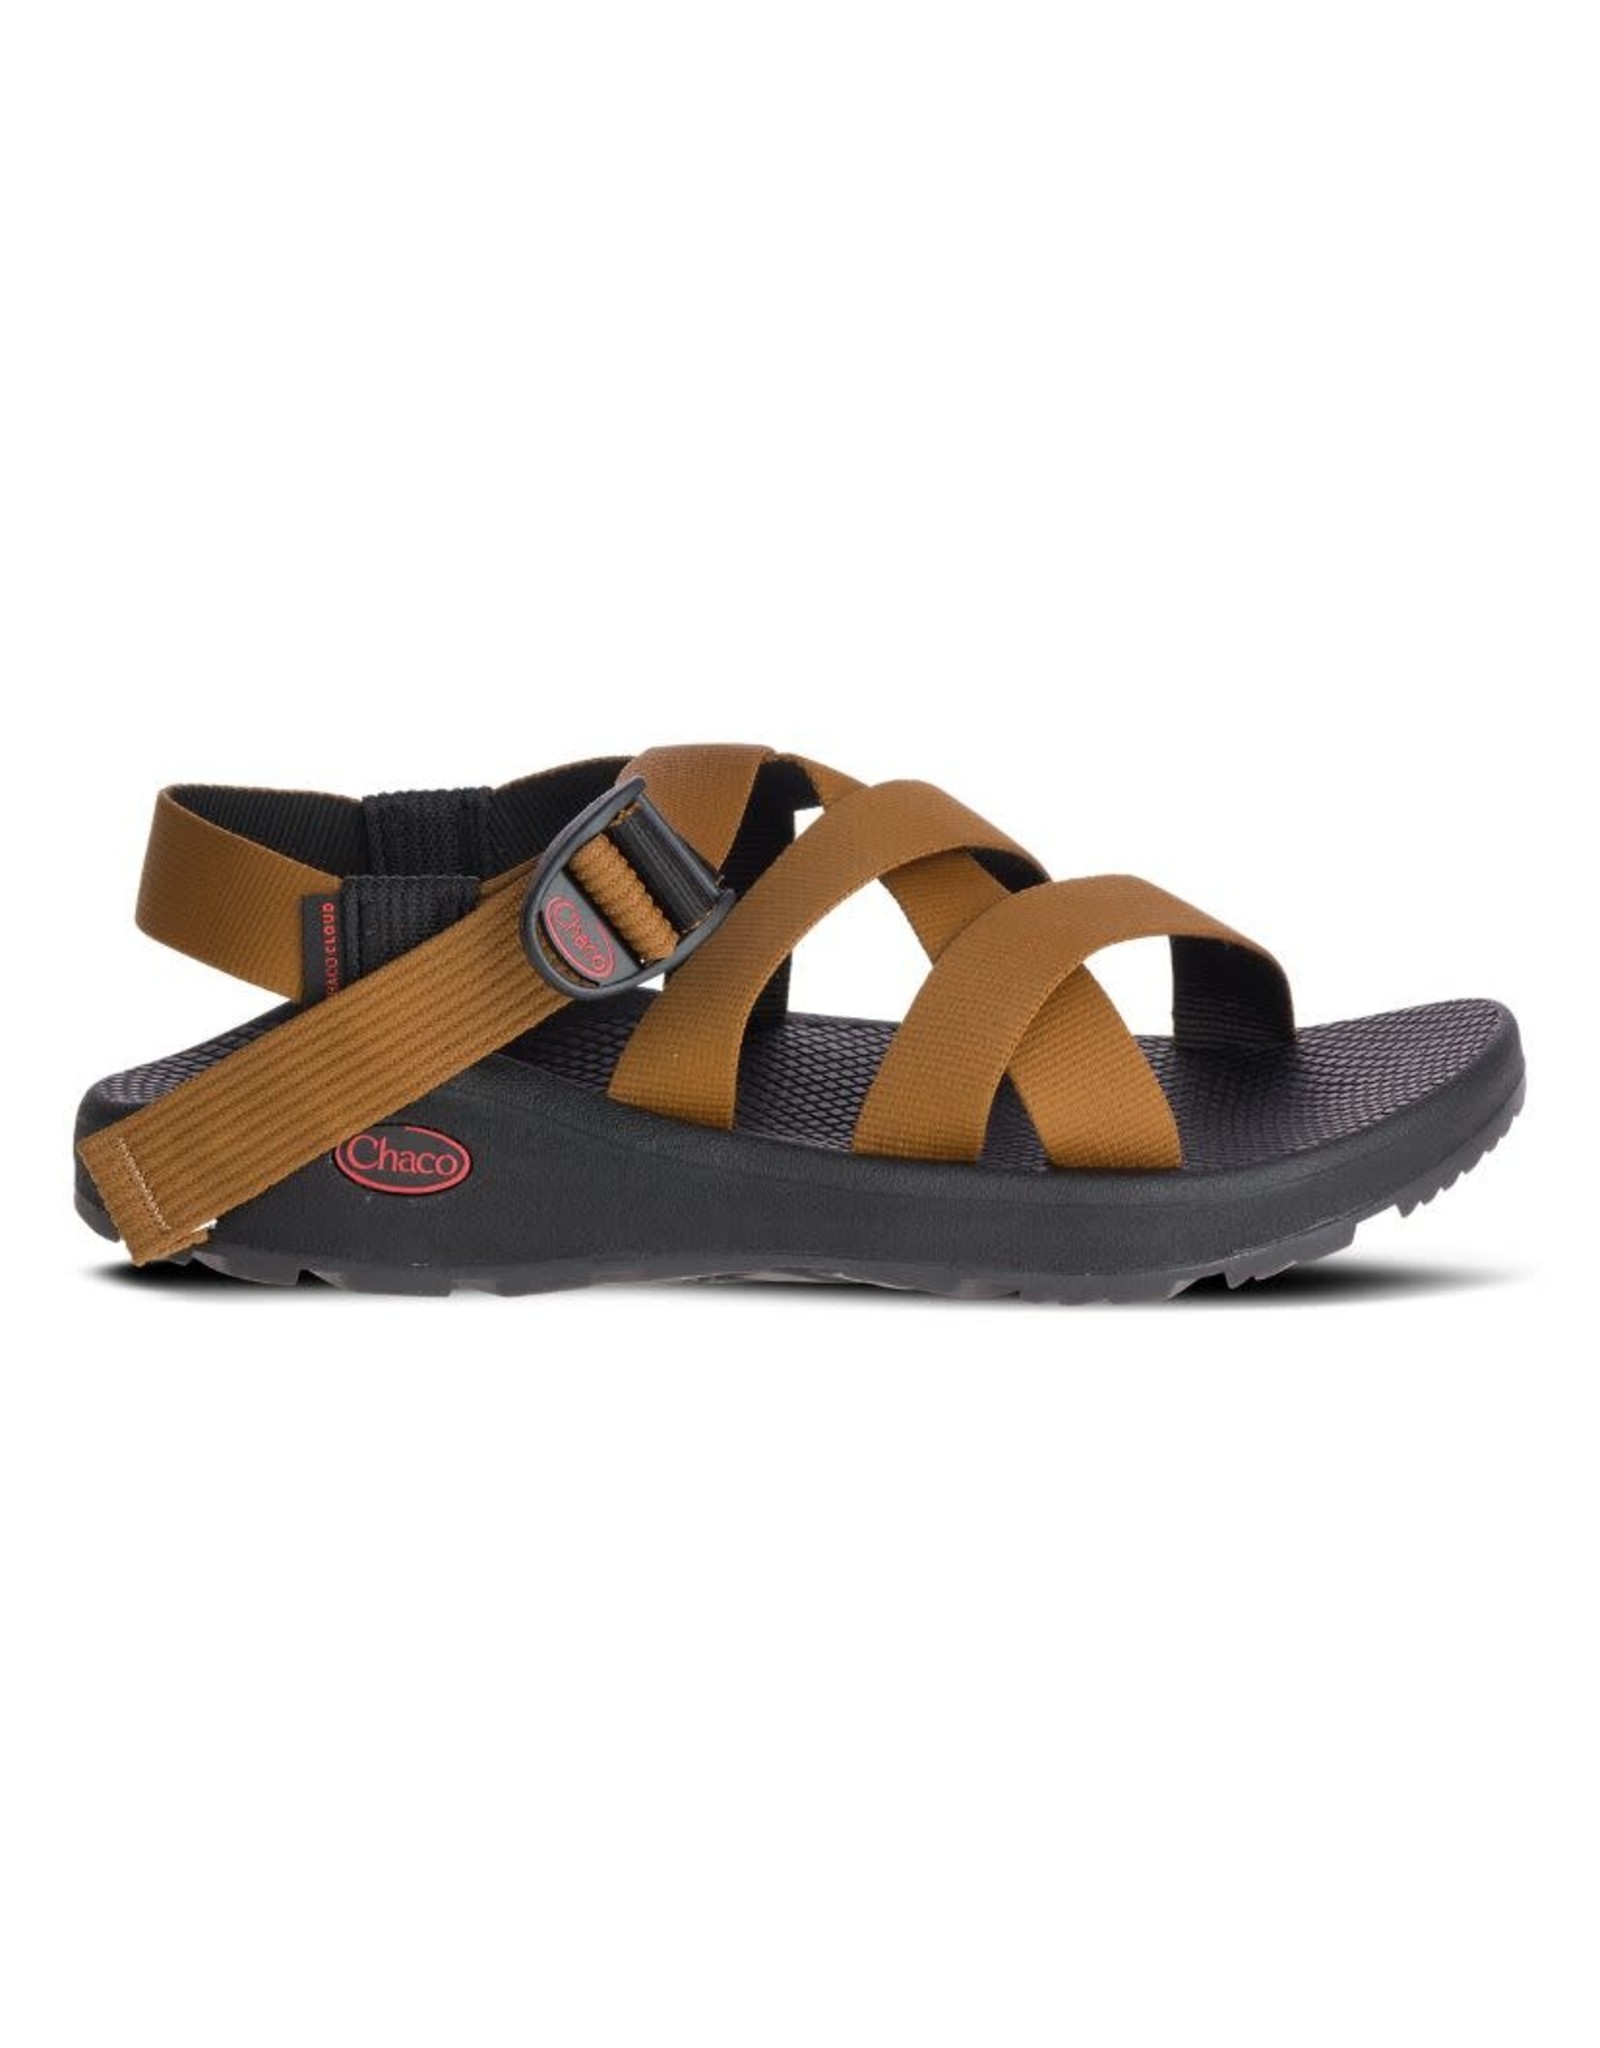 Chaco Chaco M's Banded Z Cloud Sandal